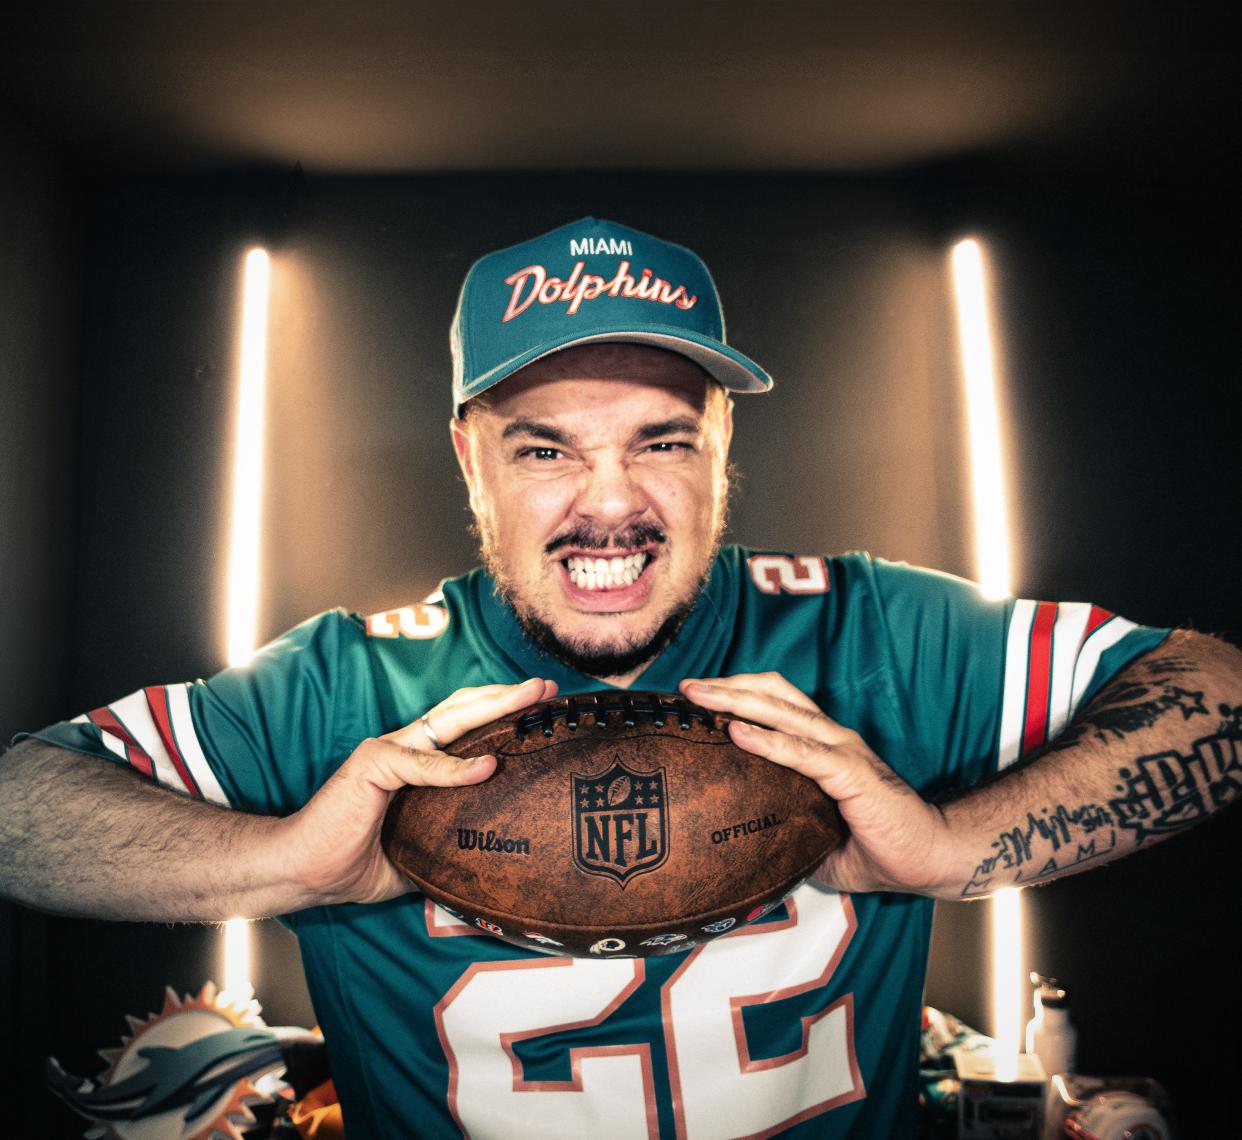 Miami Dolphins fan Chris Burghard lives in Ingolstadt, Germany and he's one of many members of the Miami DolFans Germany group. Burghard predicts Miami will beat Kansas City 35-28 in Frankfurt on Sunday. [PHOTO/CHRIS BURGHARD]